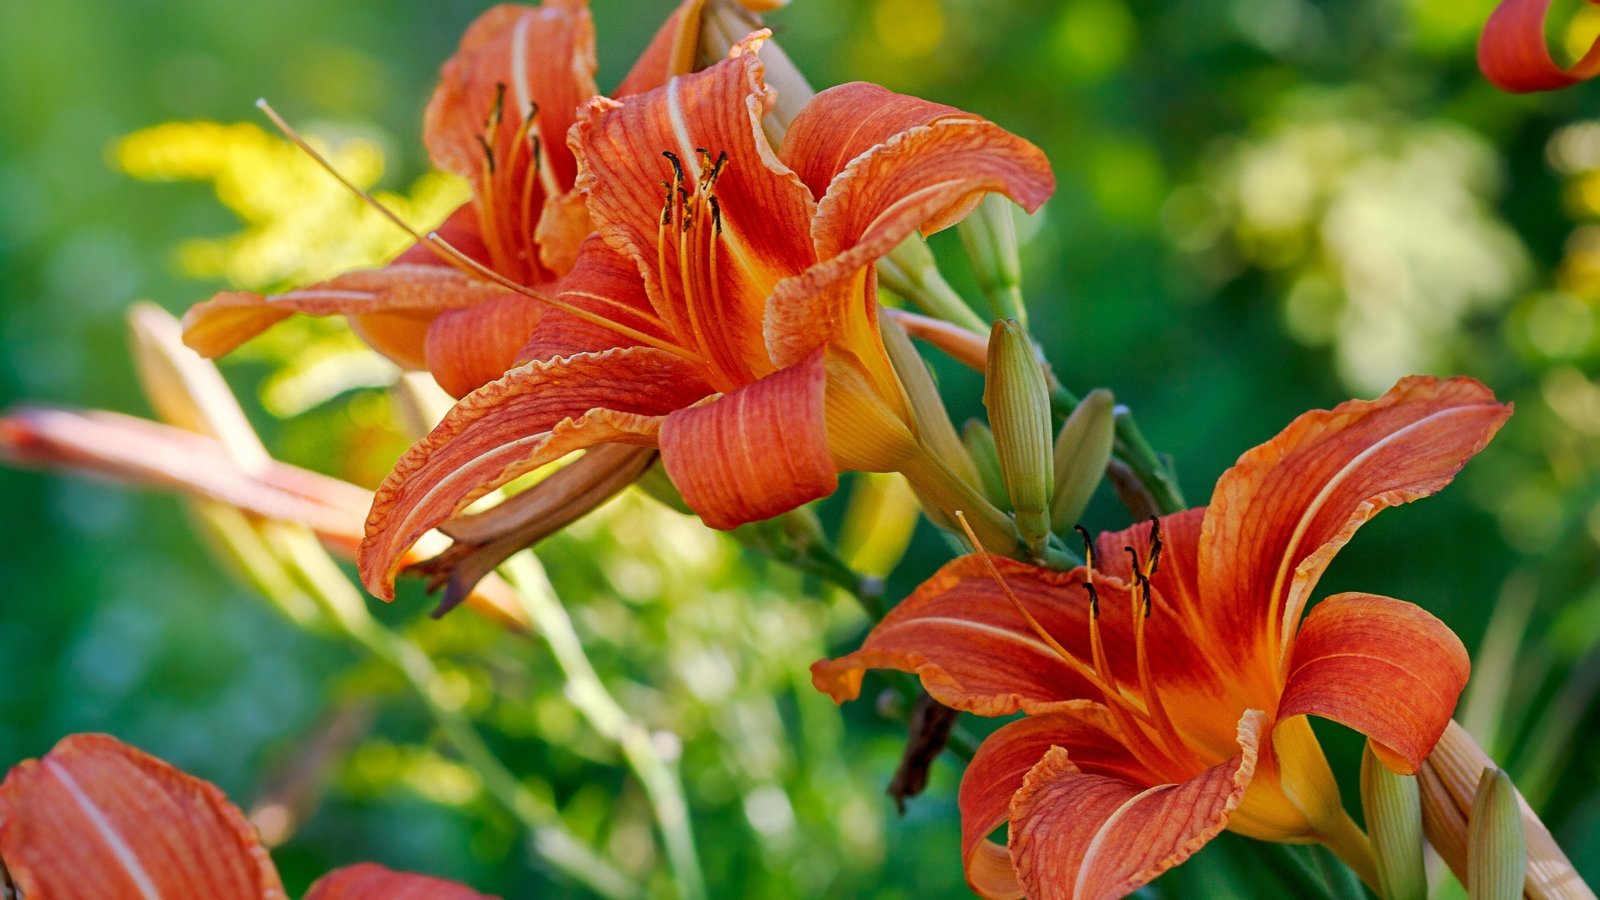 Hemerocallis, known as daylilies, display tall, slender stems and strap-shaped leaves, producing large, trumpet-shaped orange flowers.